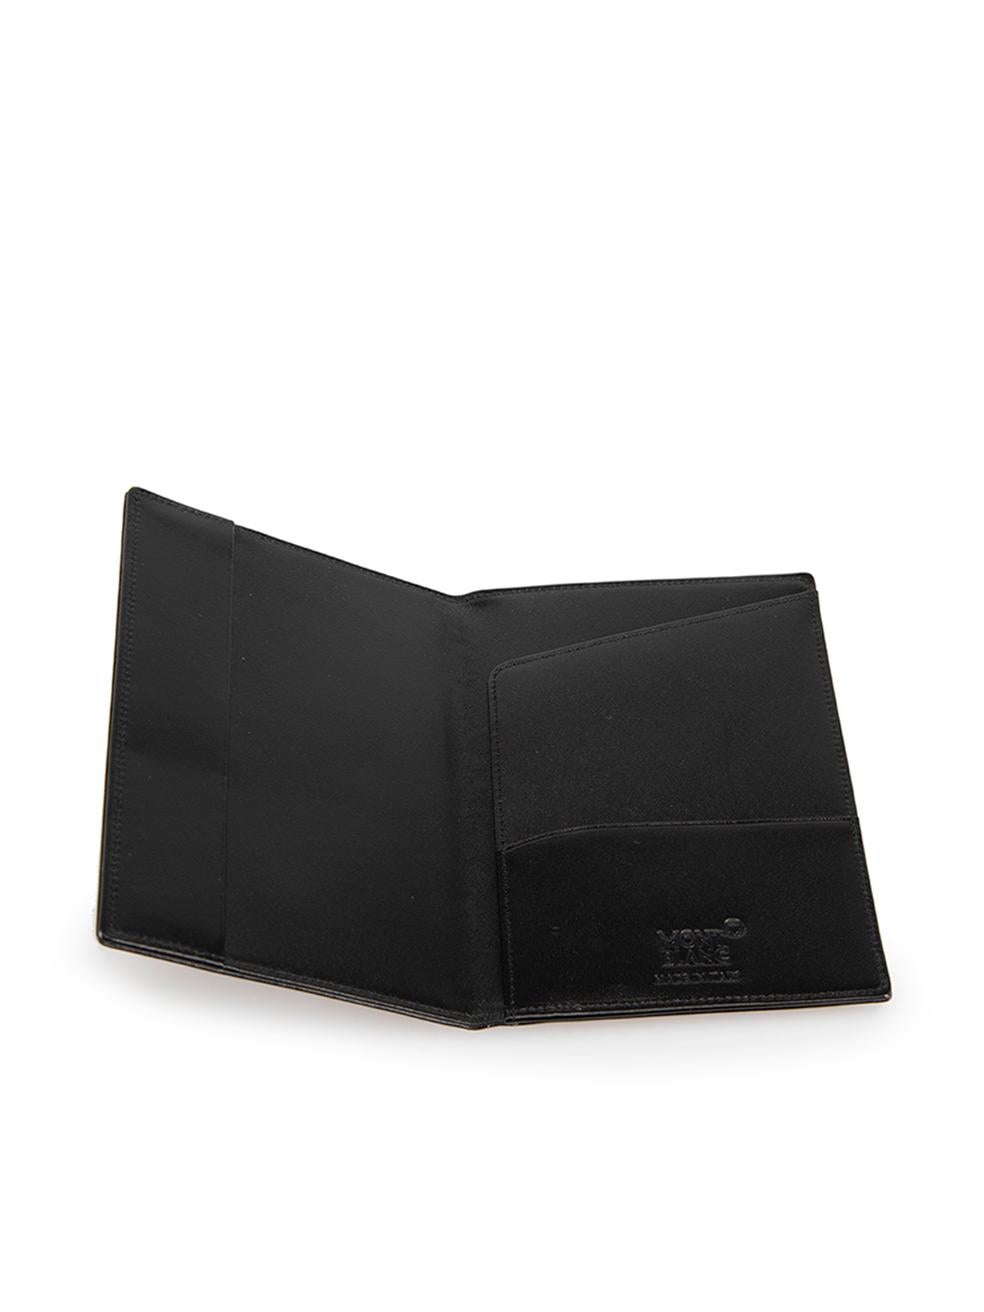 Montblanc Black Leather Passport Cover For Sale 1